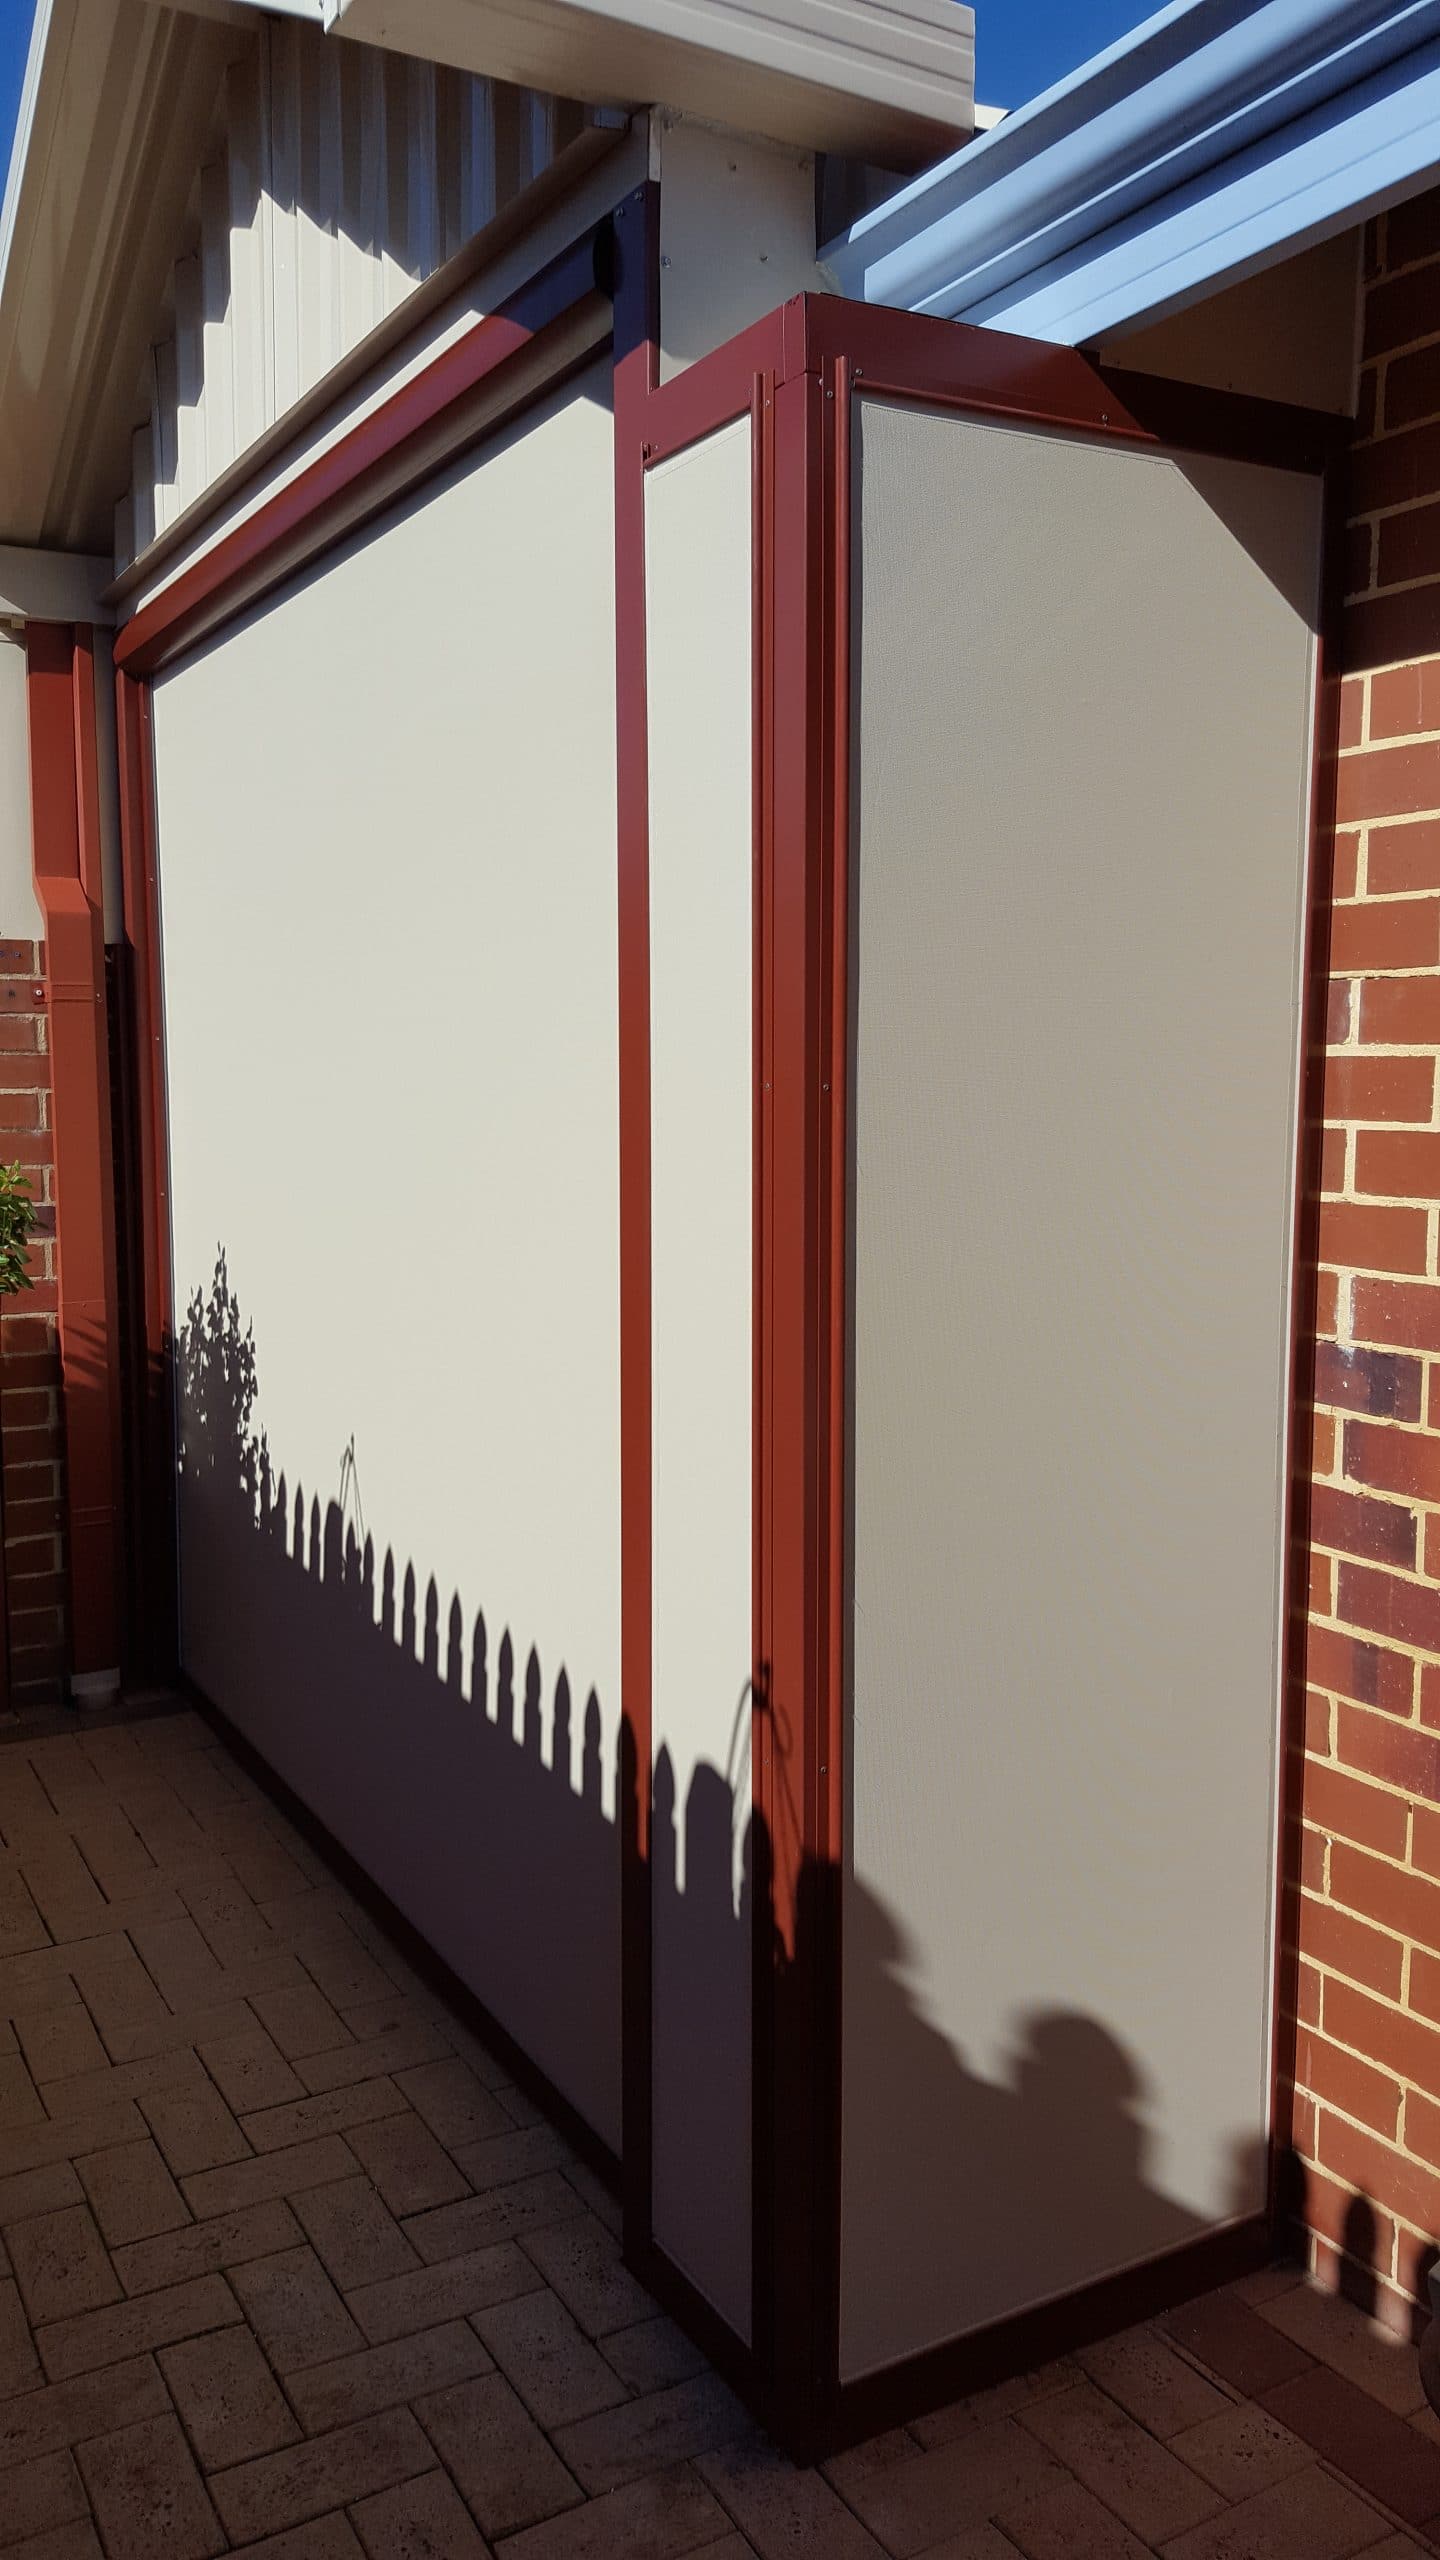 A Nustyle Galaxy blind and two small fixed panels on the side to enclose the patio area